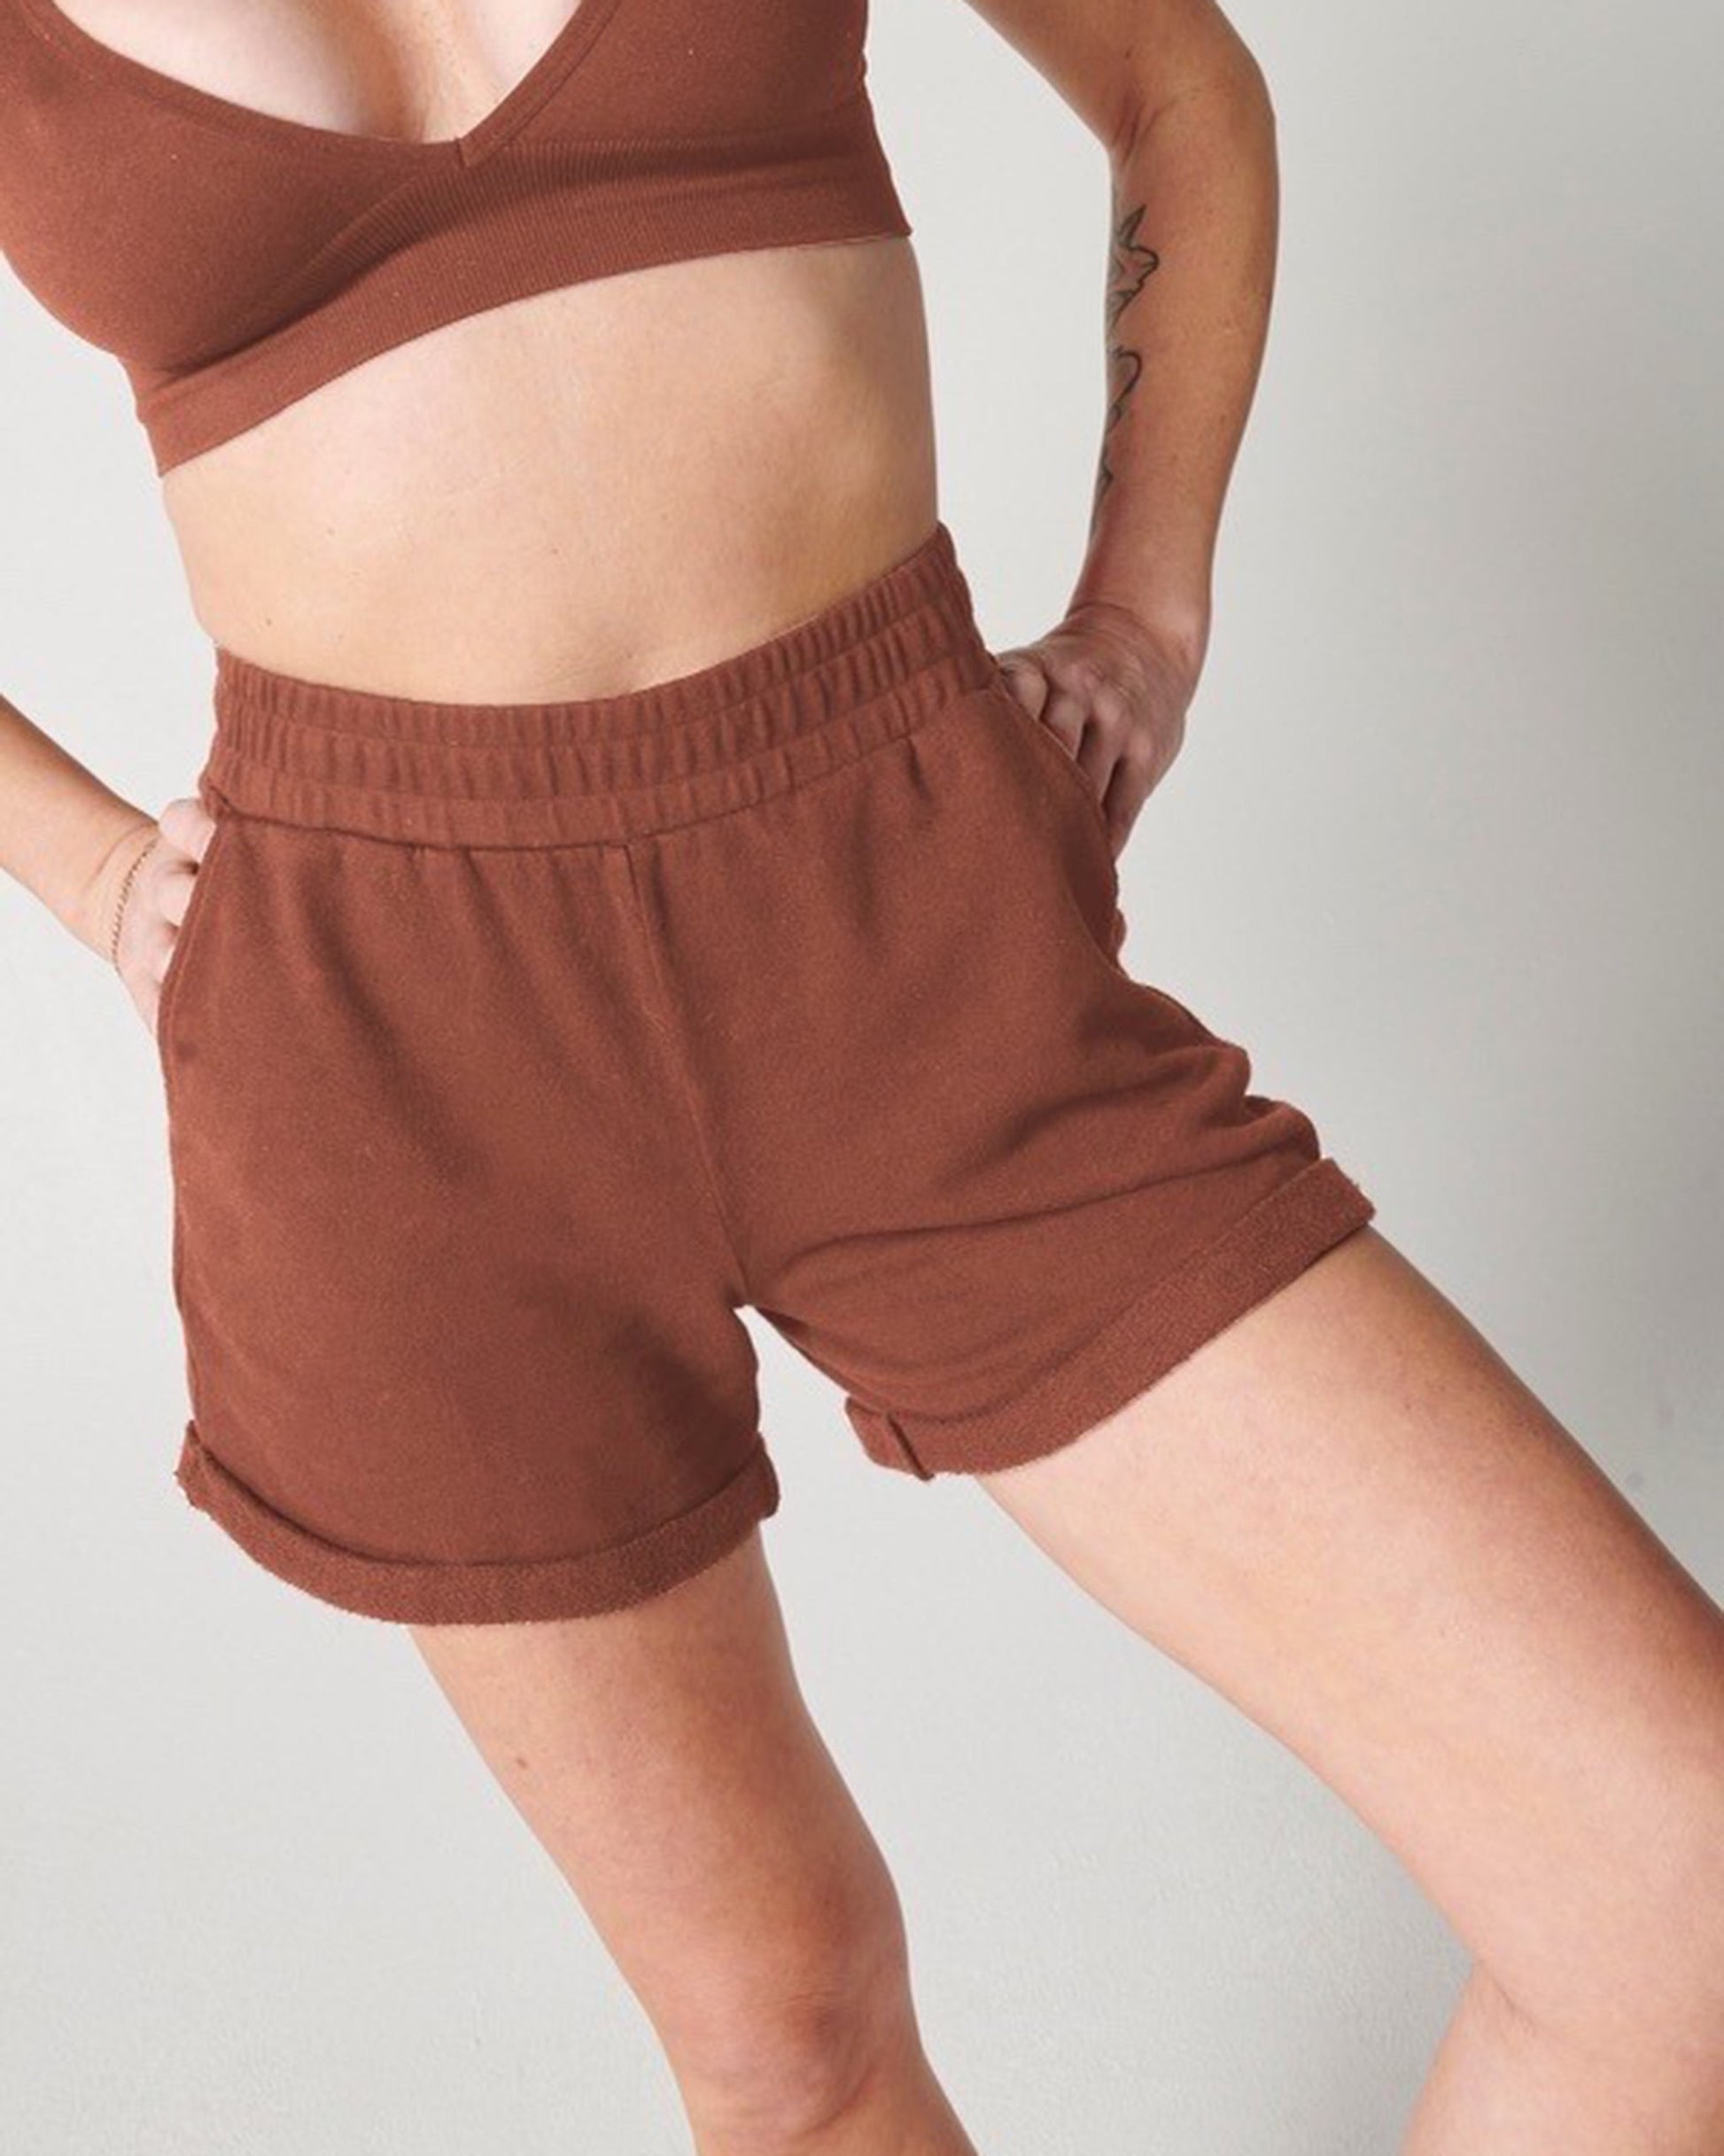 Vintage tobacco organic cotton sweat shorts and vintage tobacco bra on woman's body with hands on hips